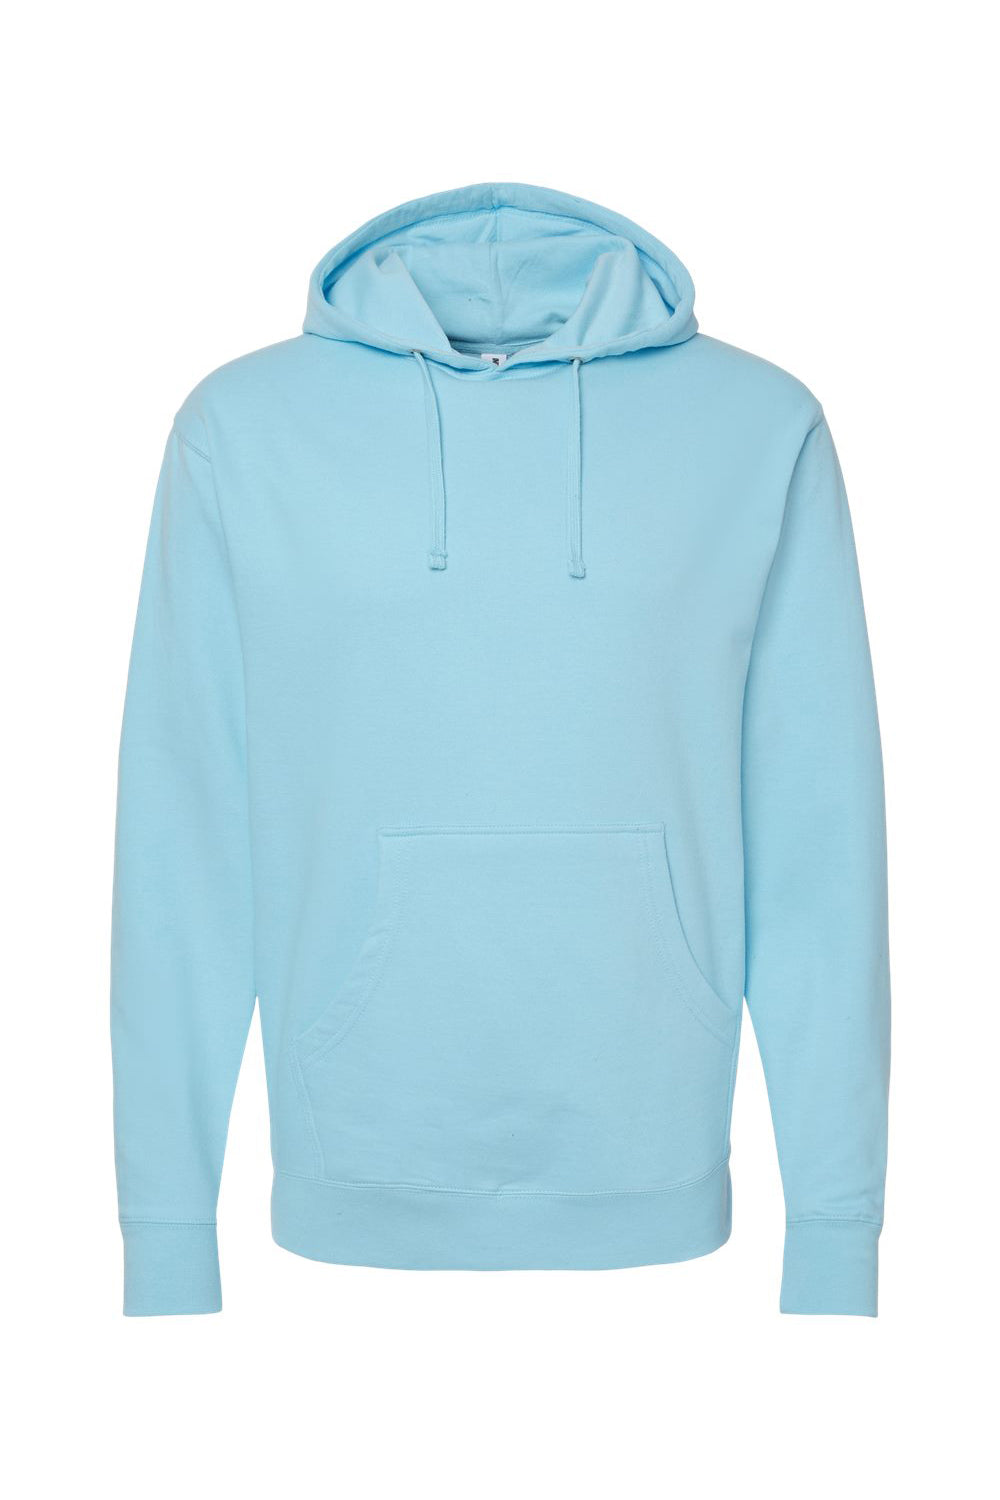 Independent Trading Co. SS4500 Mens Hooded Sweatshirt Hoodie Aqua Blue Flat Front